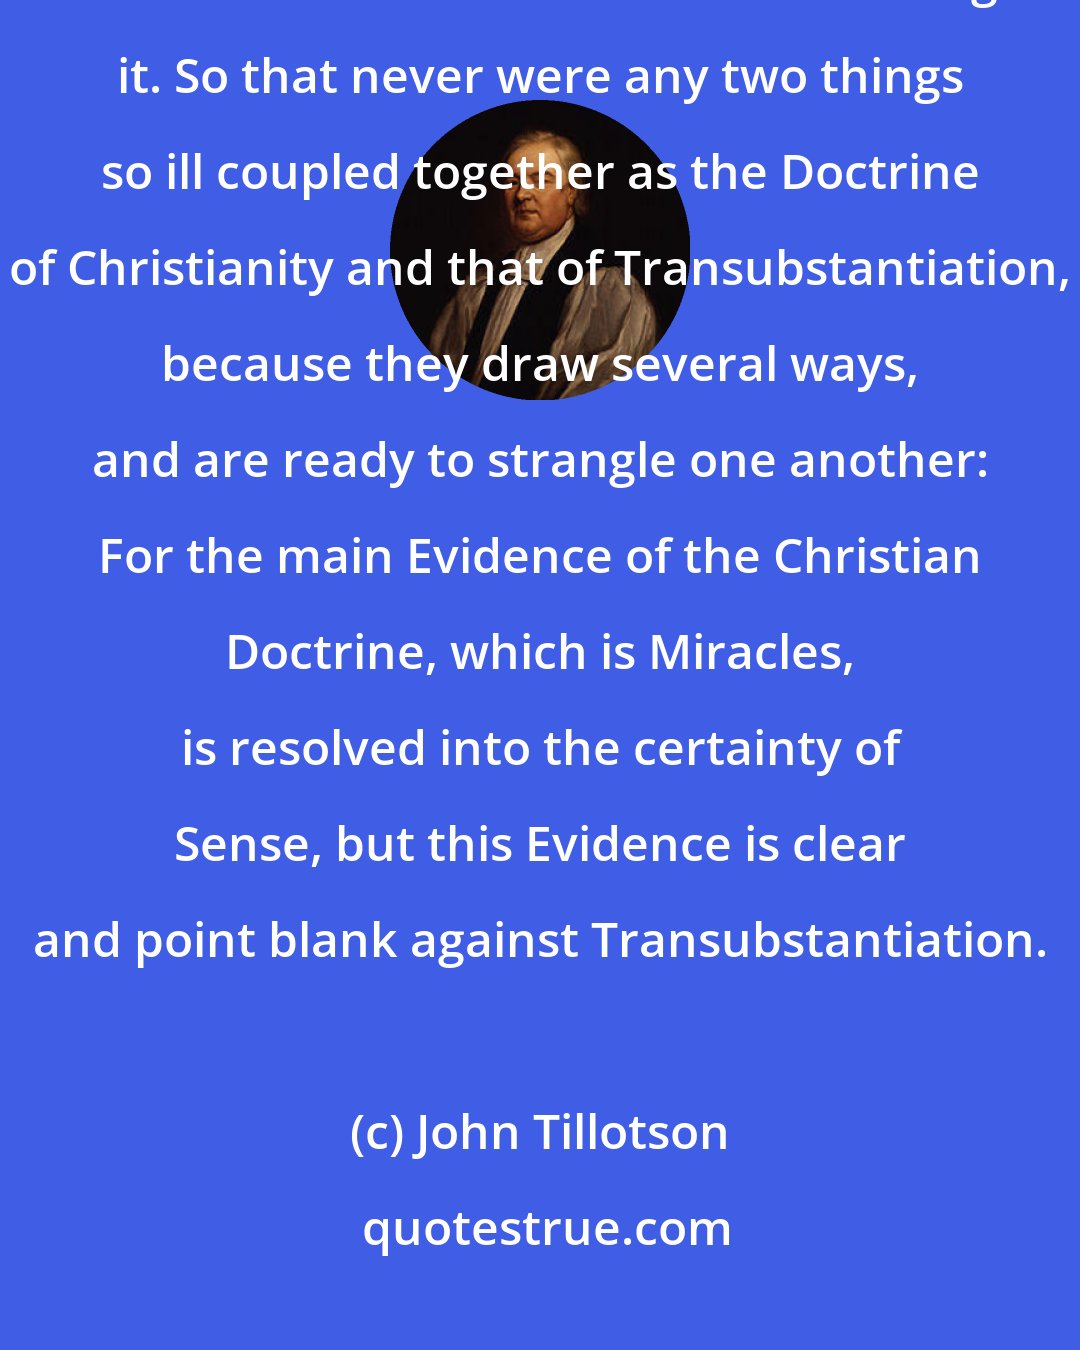 John Tillotson: For a Man cannot believe a Miracle without relying upon Sense, nor Transubstantiation without renouncing it. So that never were any two things so ill coupled together as the Doctrine of Christianity and that of Transubstantiation, because they draw several ways, and are ready to strangle one another: For the main Evidence of the Christian Doctrine, which is Miracles, is resolved into the certainty of Sense, but this Evidence is clear and point blank against Transubstantiation.